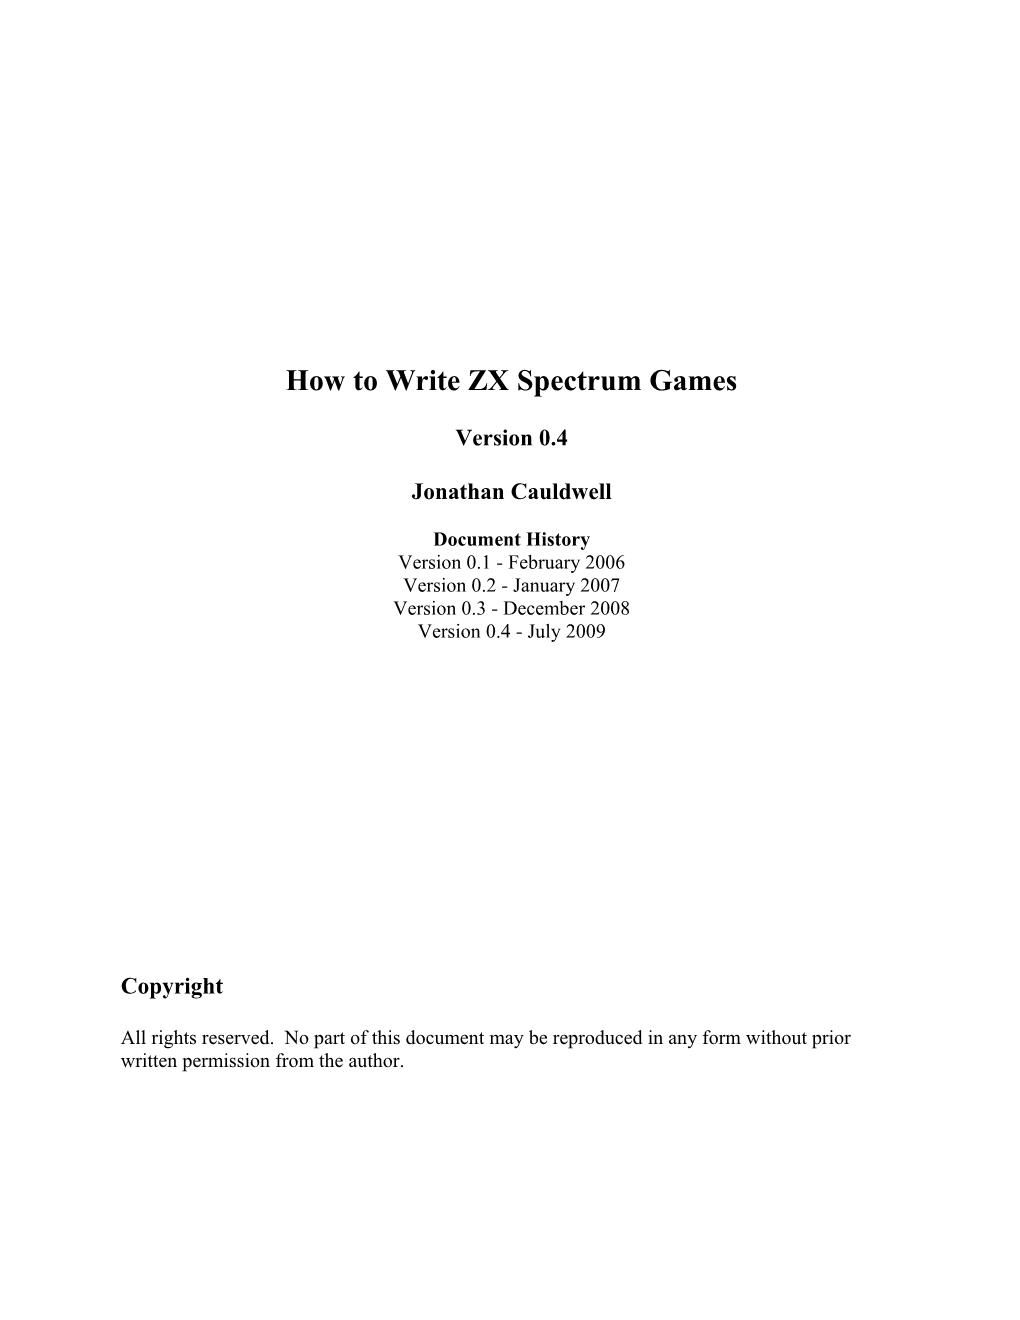 How to Write ZX Spectrum Games